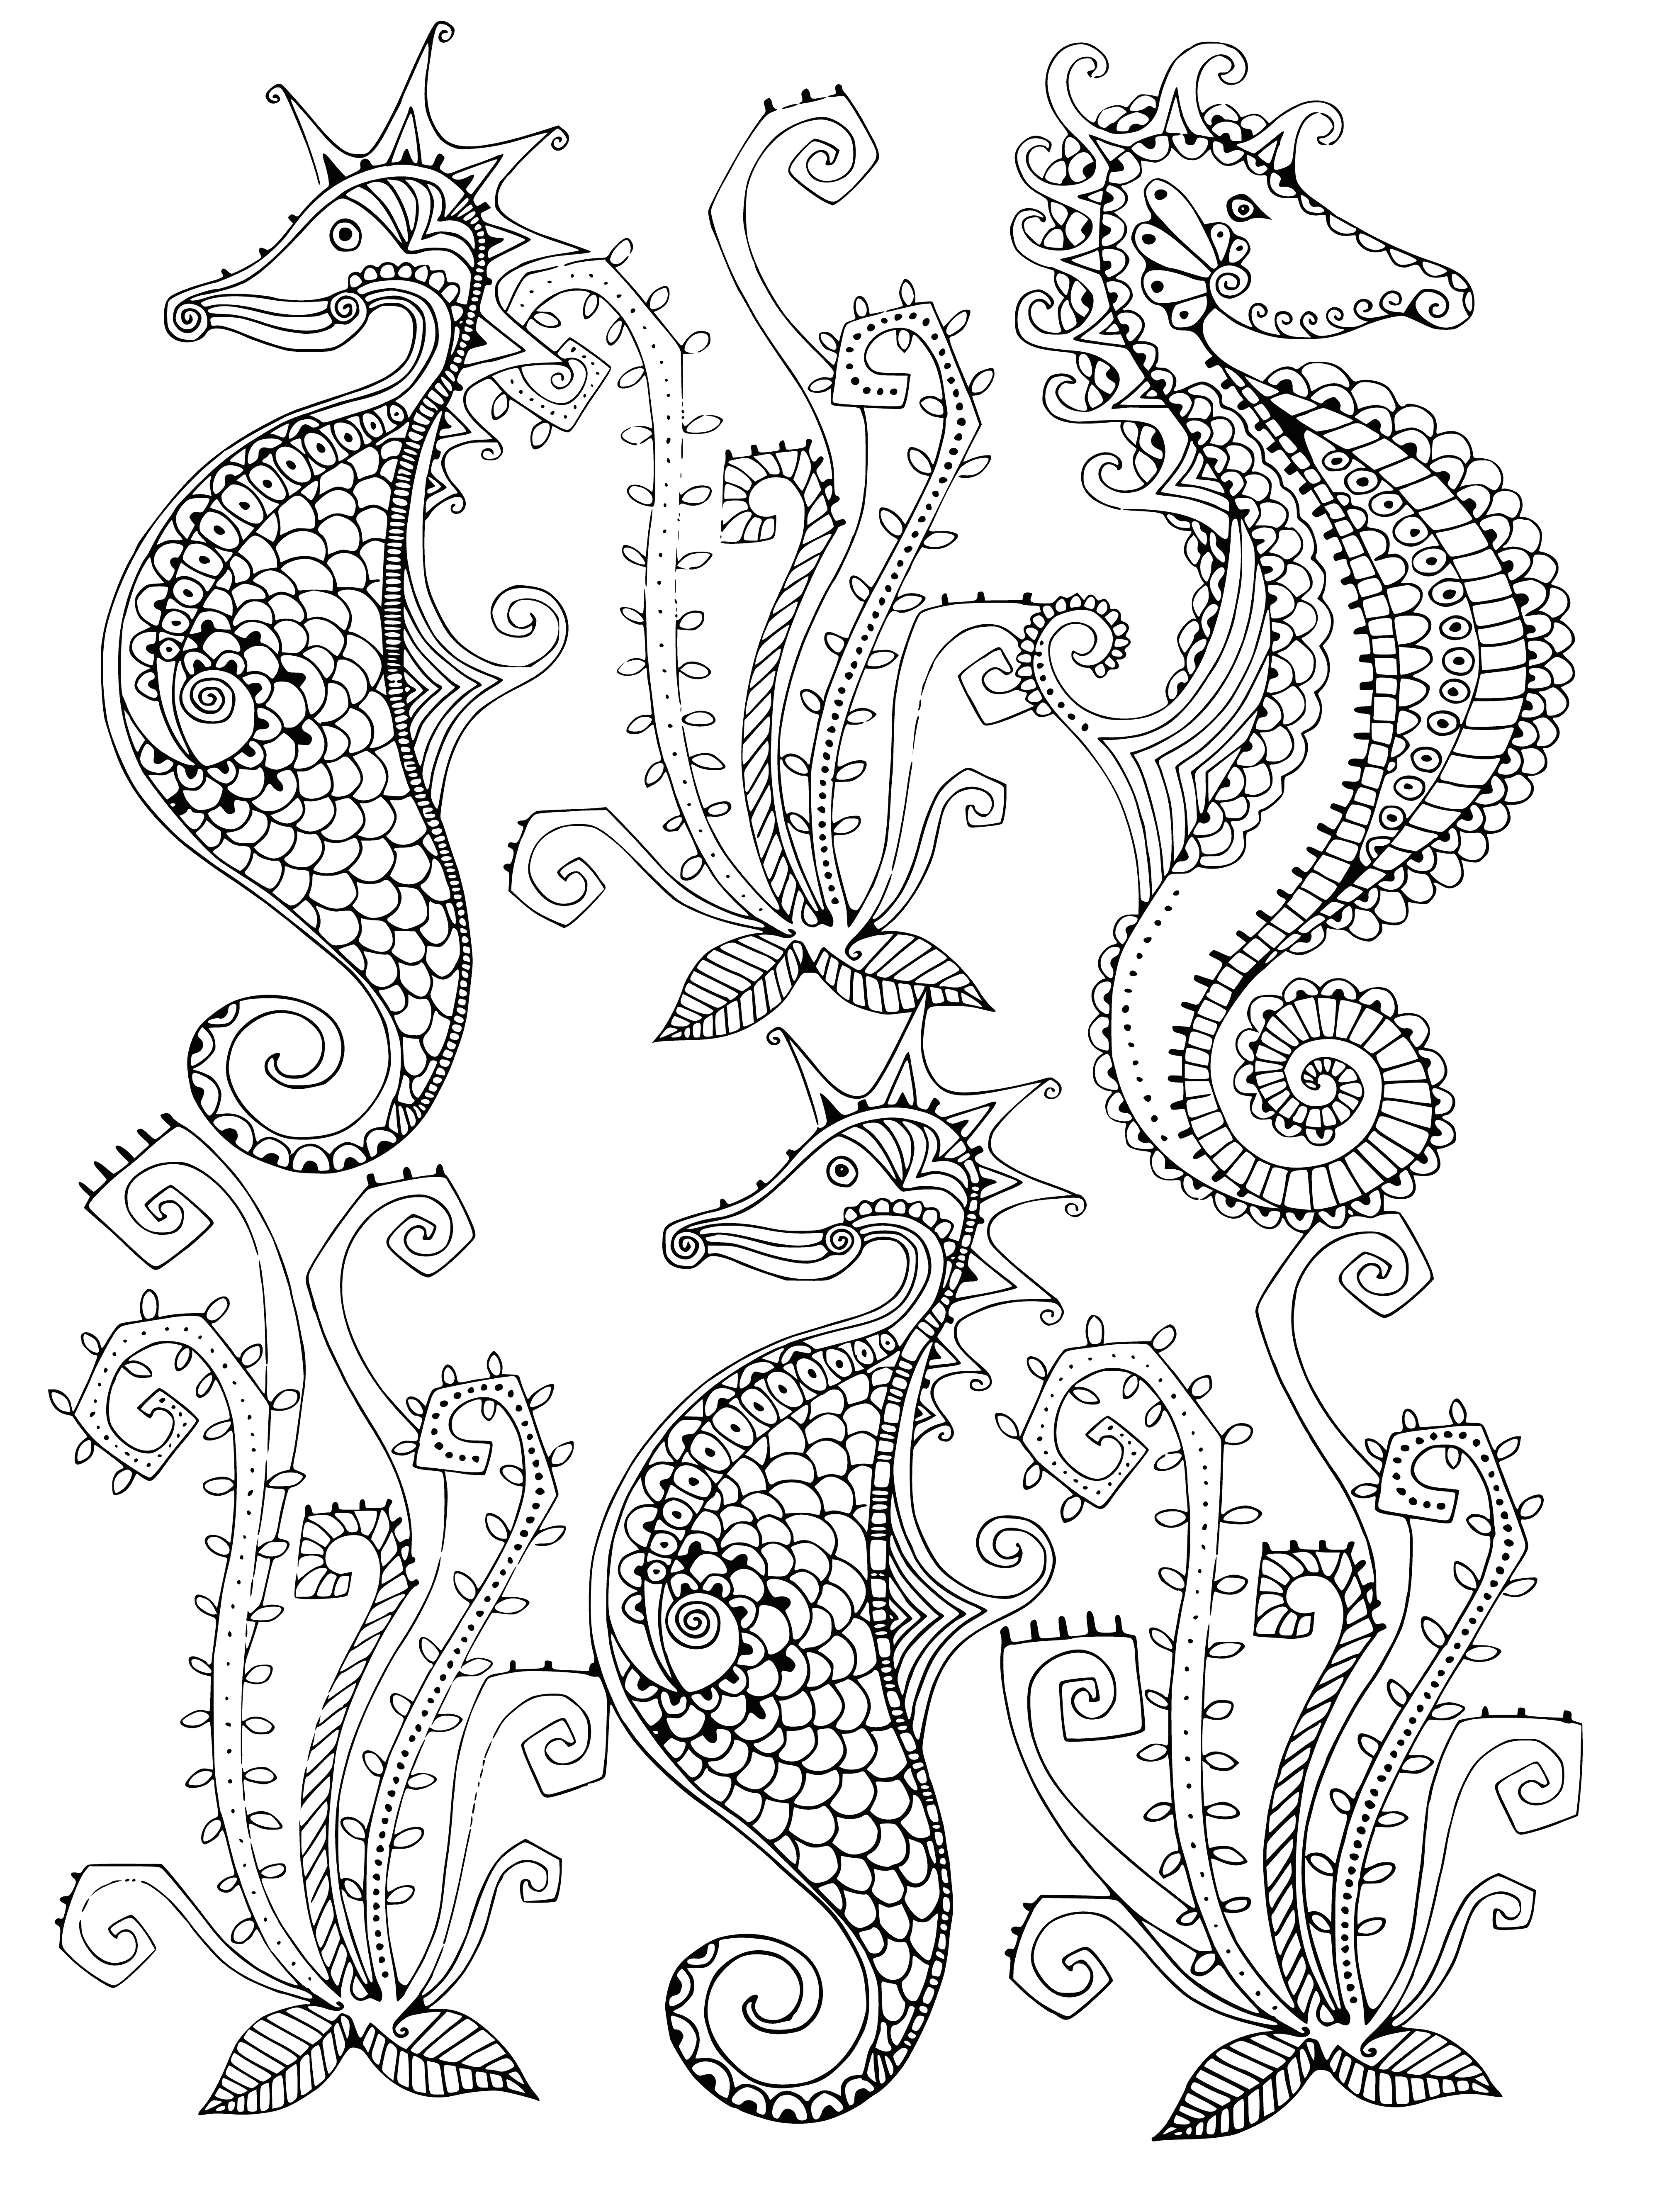 coloring page: Sea horses swim in a green ocean: yellow & green with orange stripes & spots, long bodies & horsy heads. #coloringpage